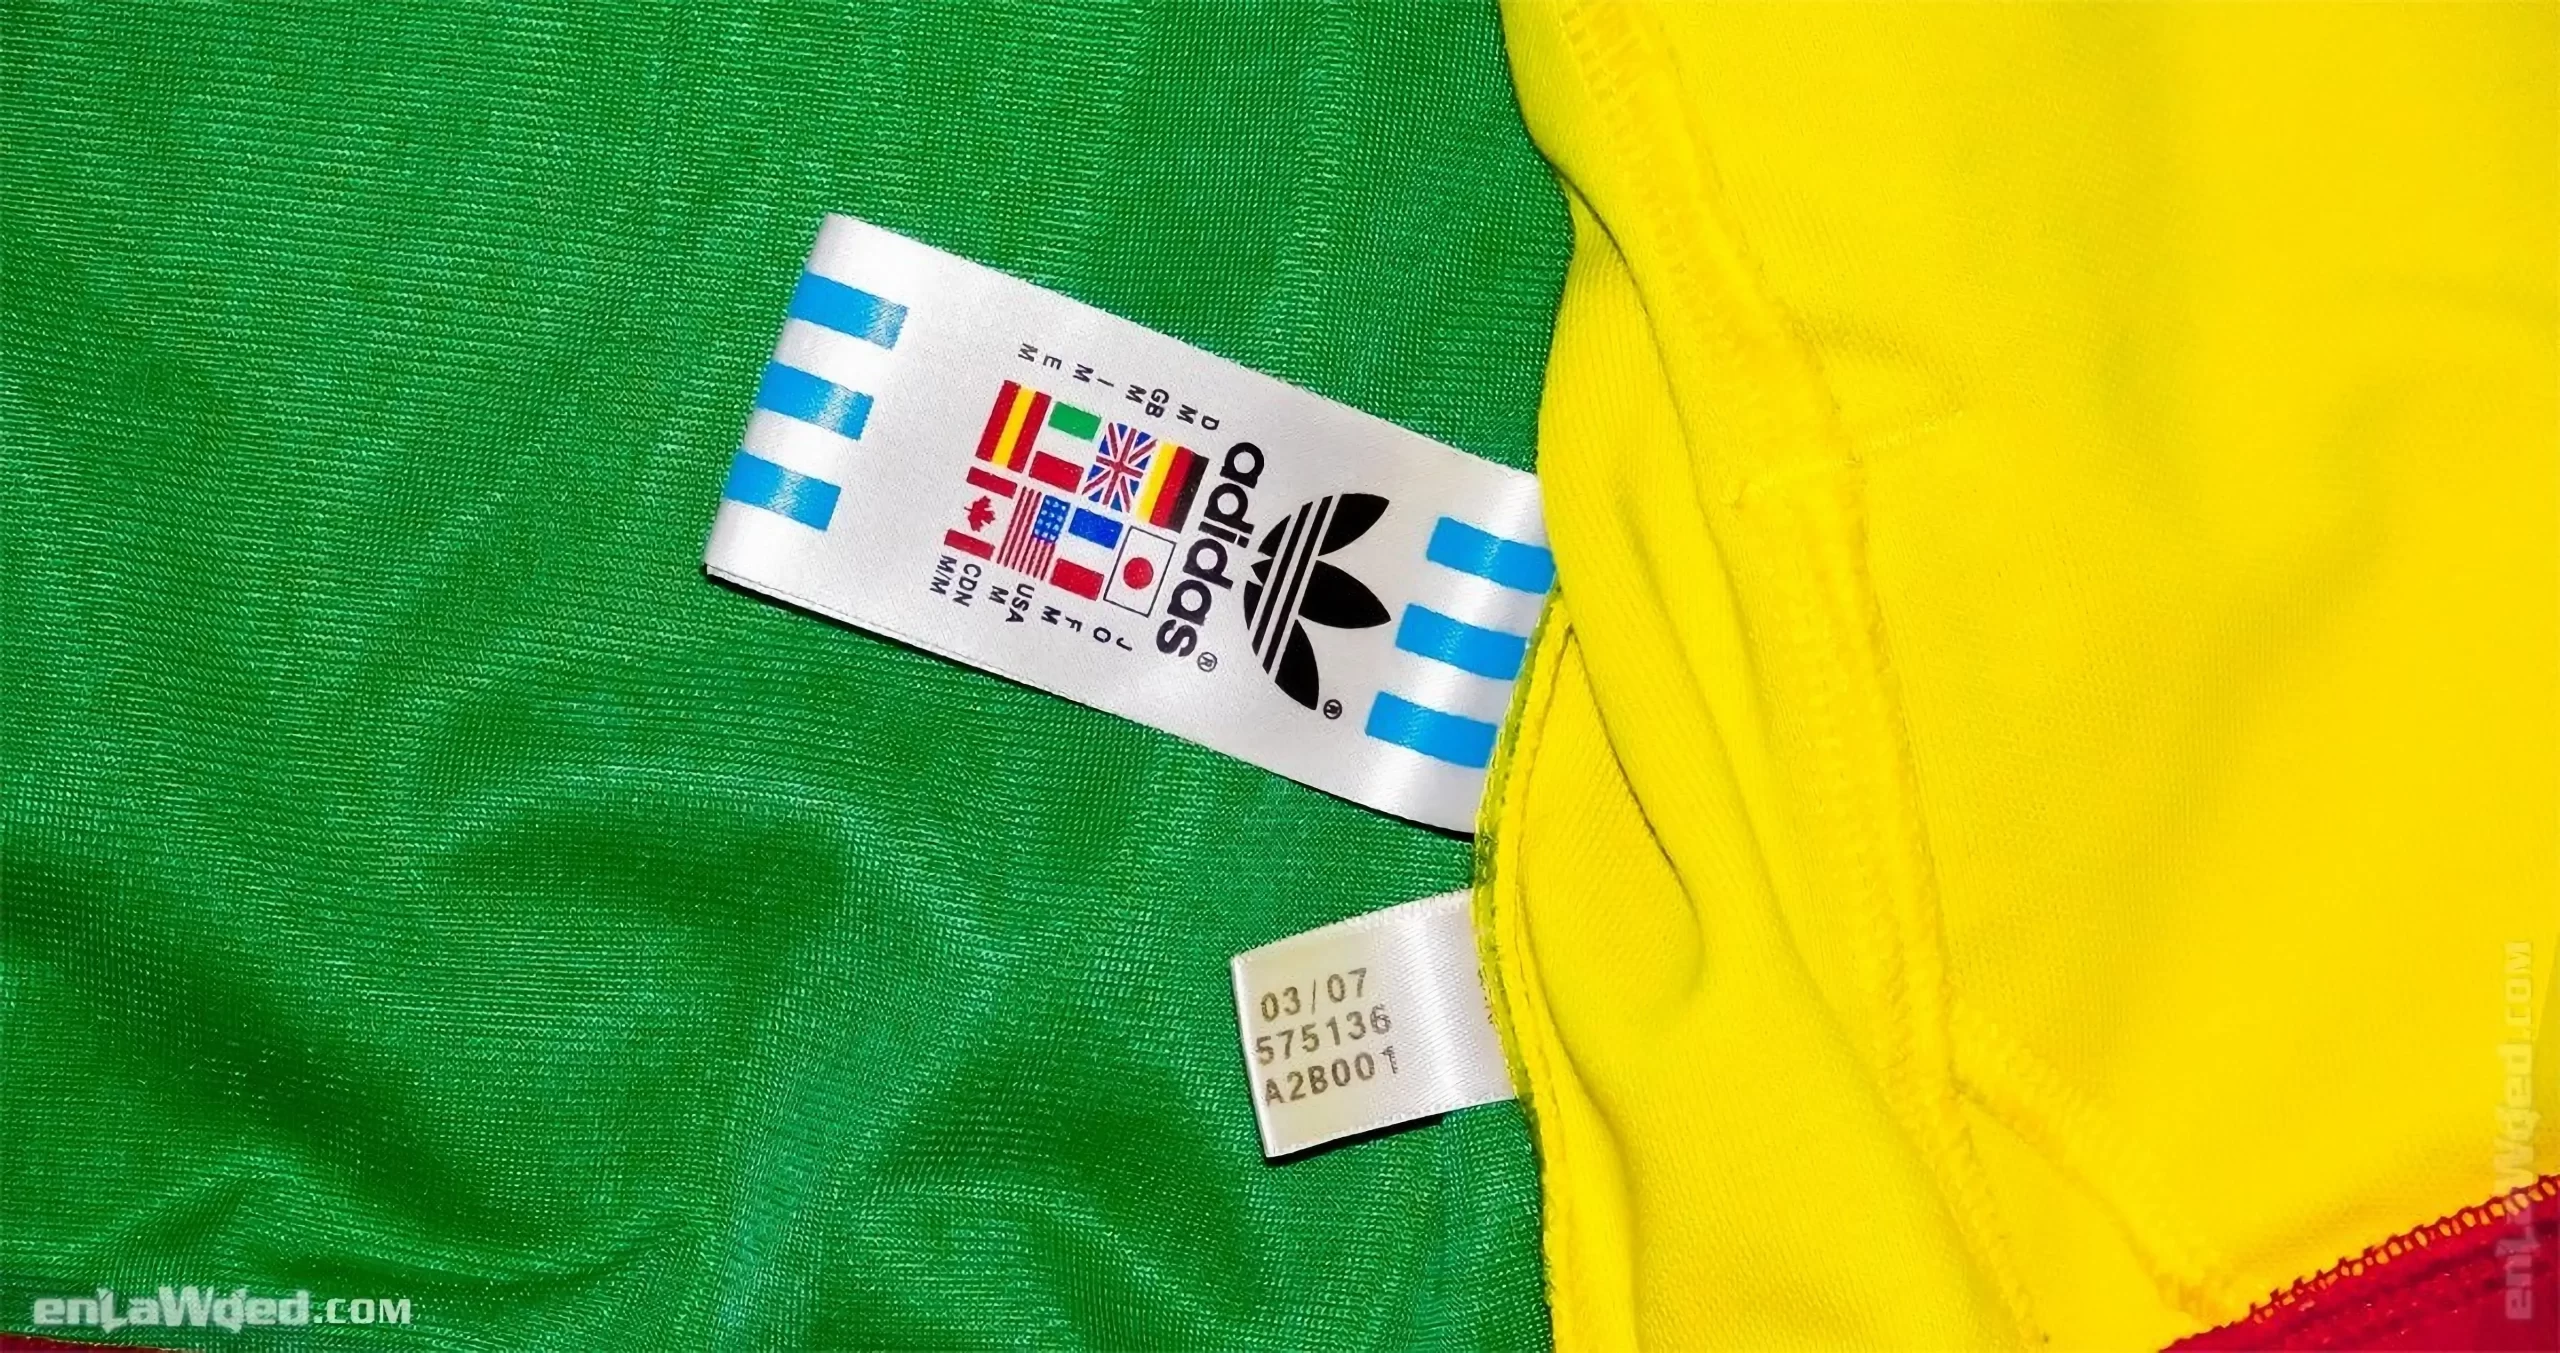 Adidas tag of the Cameroon jacket, with the month and year of fabrication: 03/2007